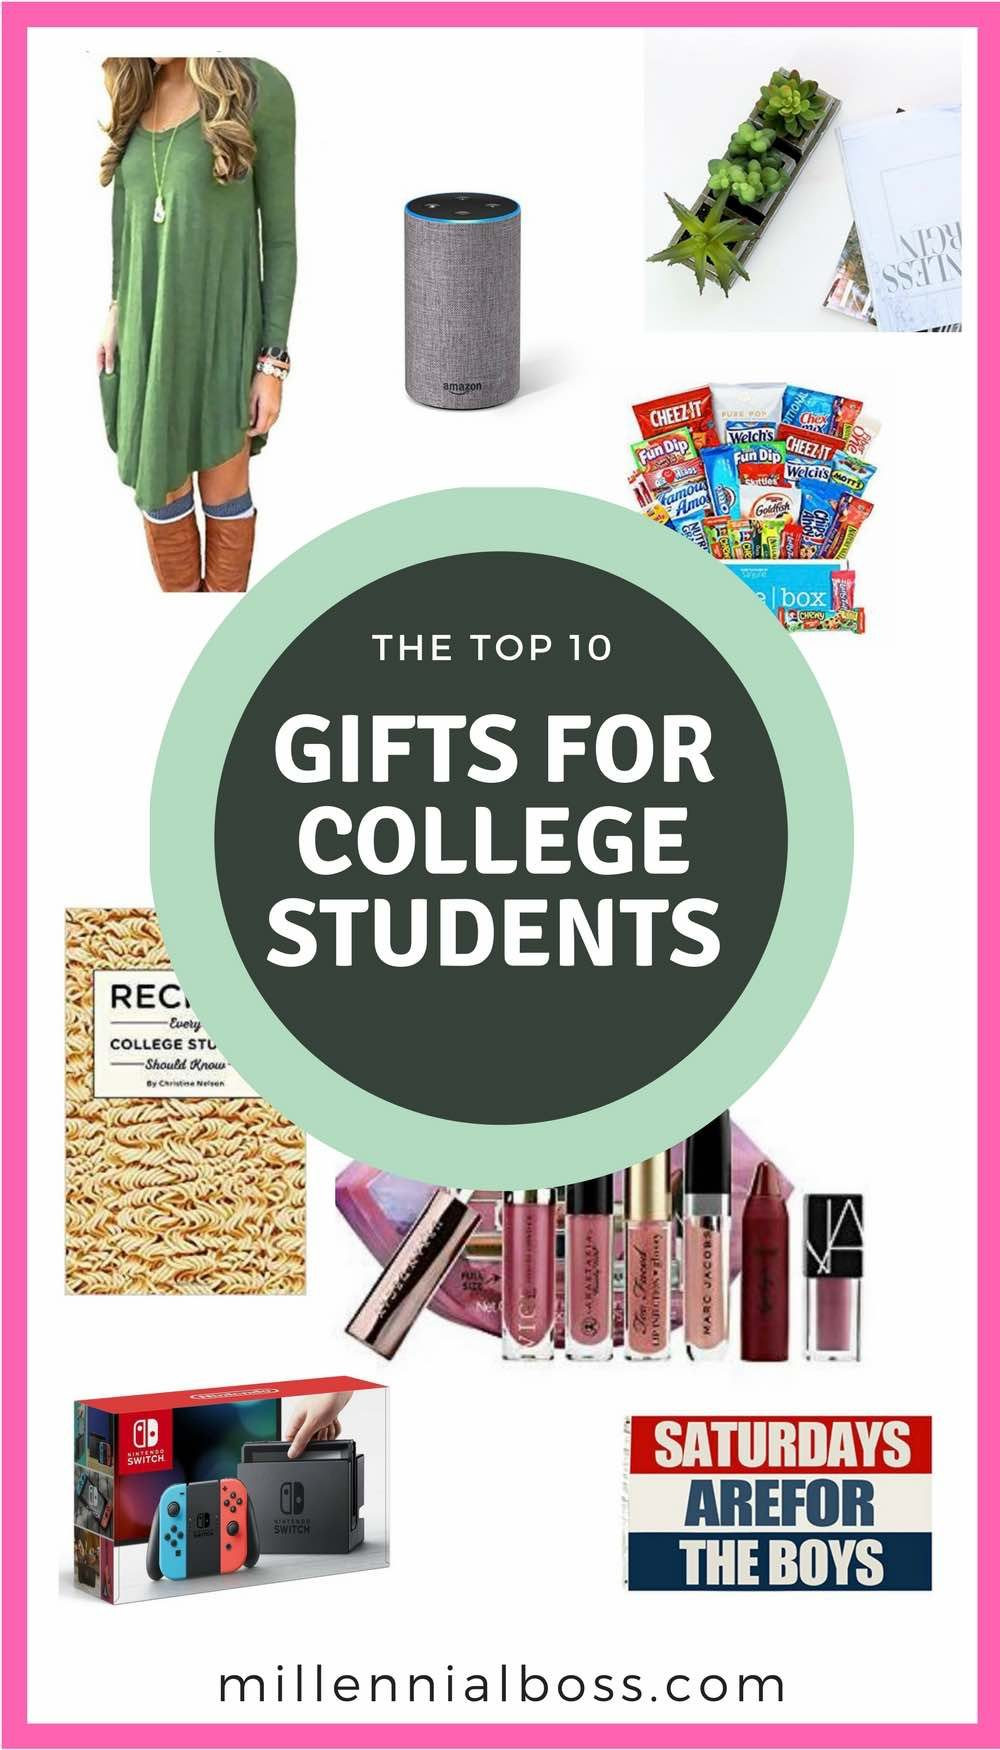 College Student Christmas Gift Ideas
 Best Christmas Gifts For College Students